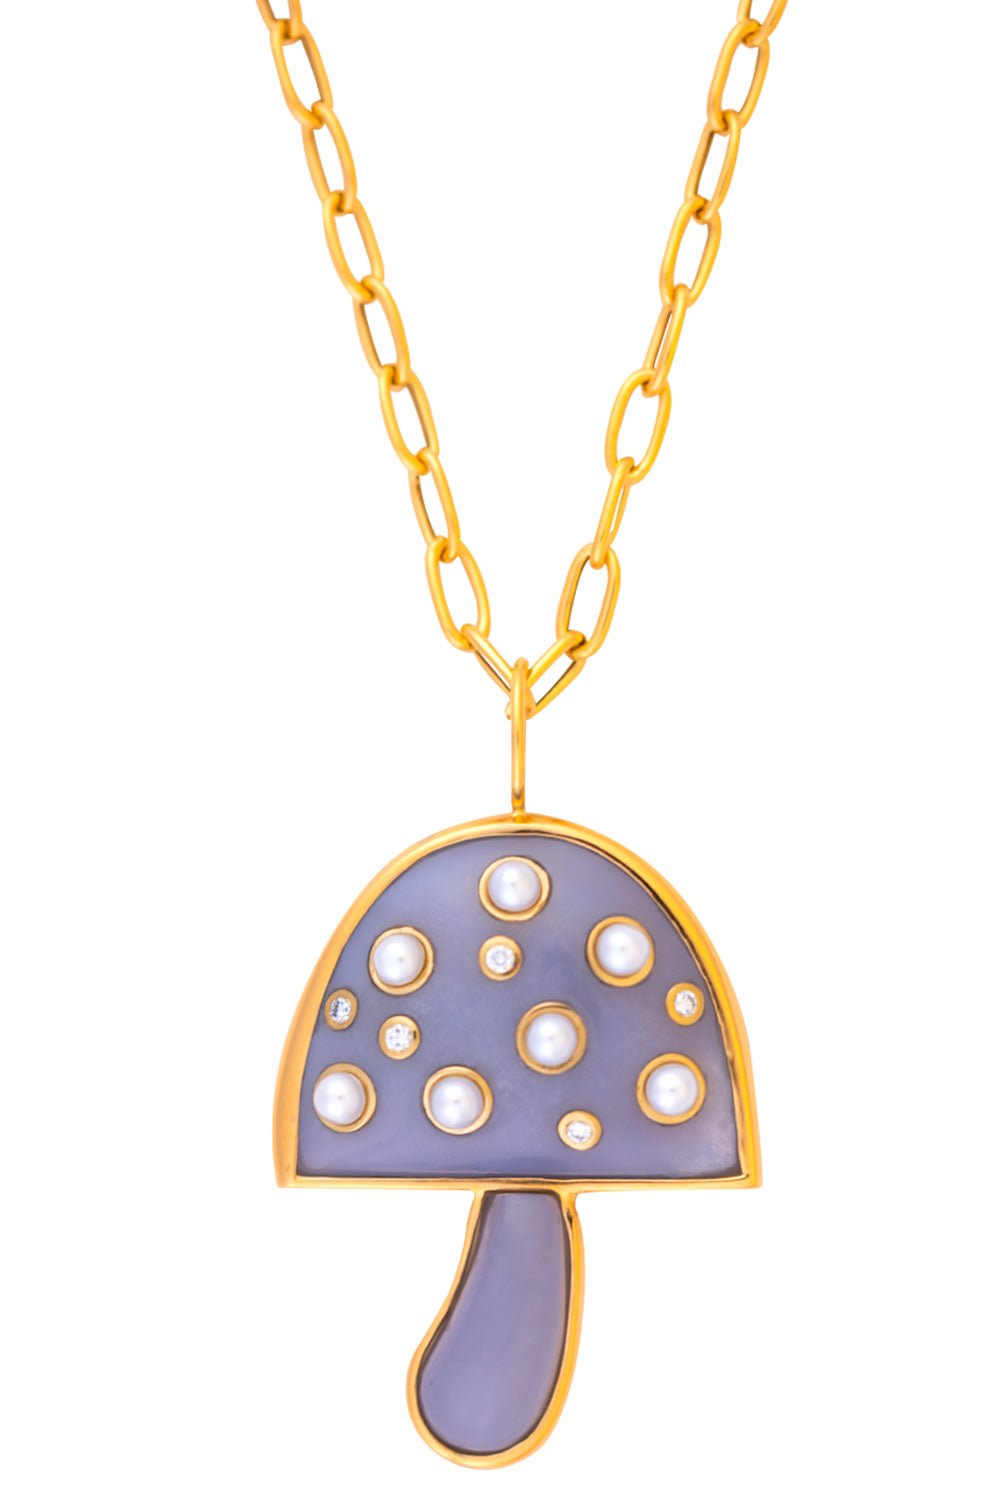 BRENT NEALE-Chalcedony Pearl Mushroom Necklace-YELLOW GOLD